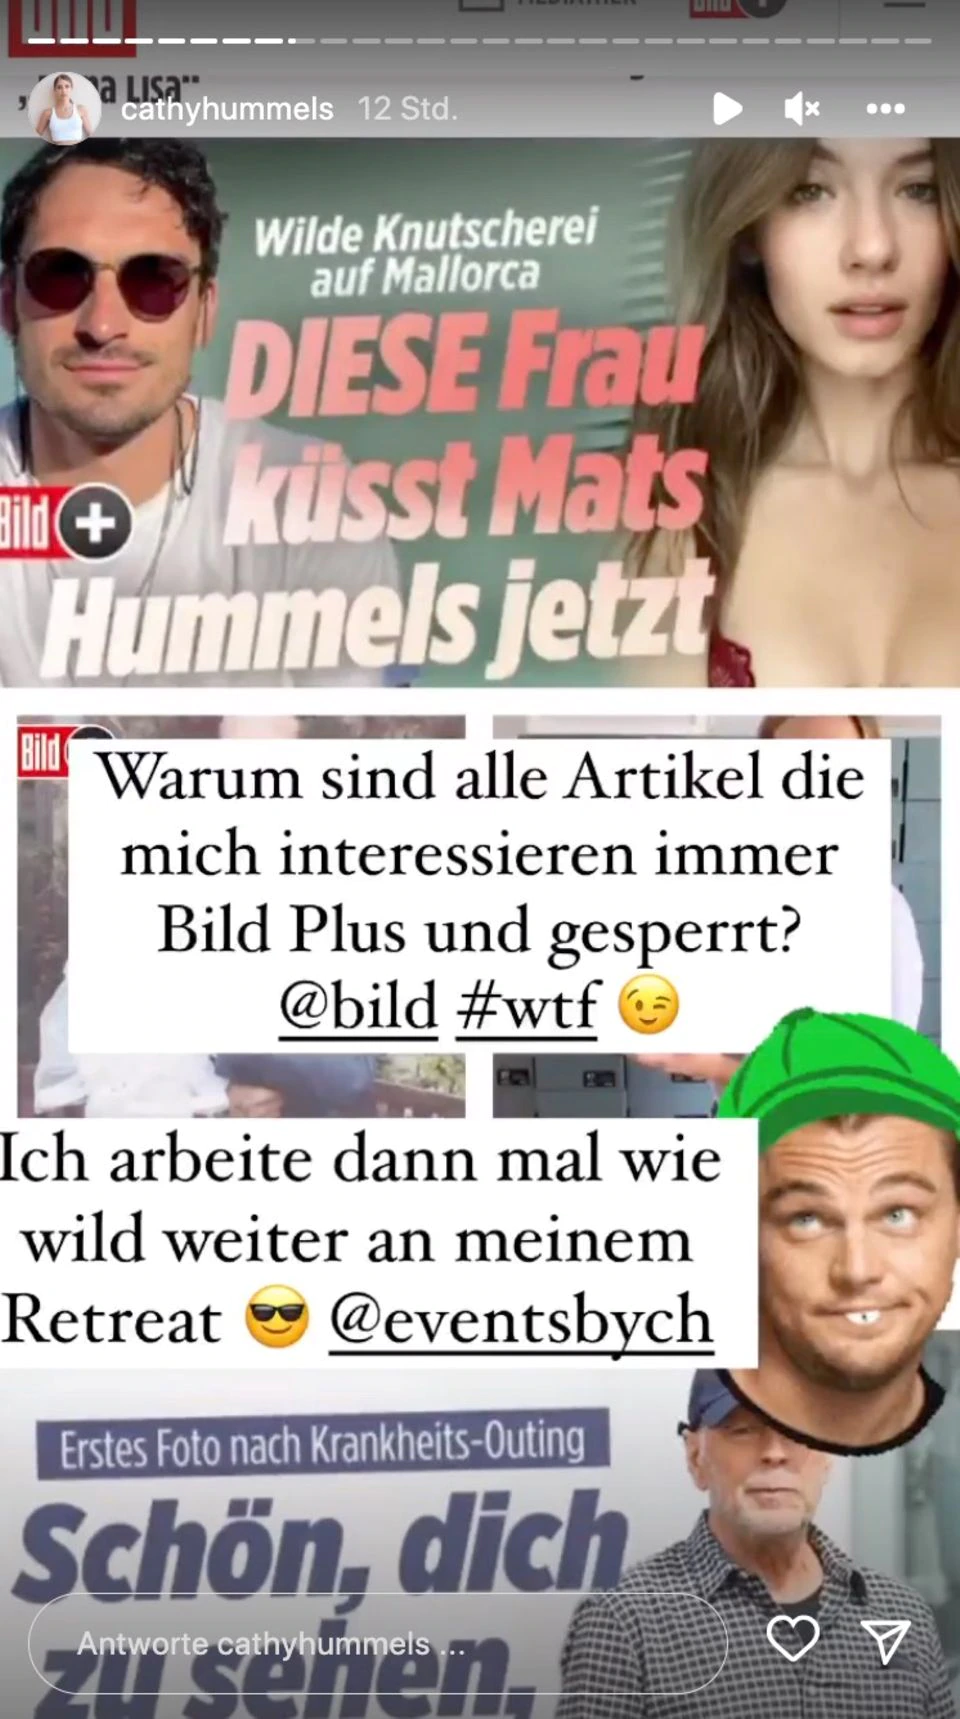 Cathy Hummels: This is how she reacts to Mats' new kiss headlines